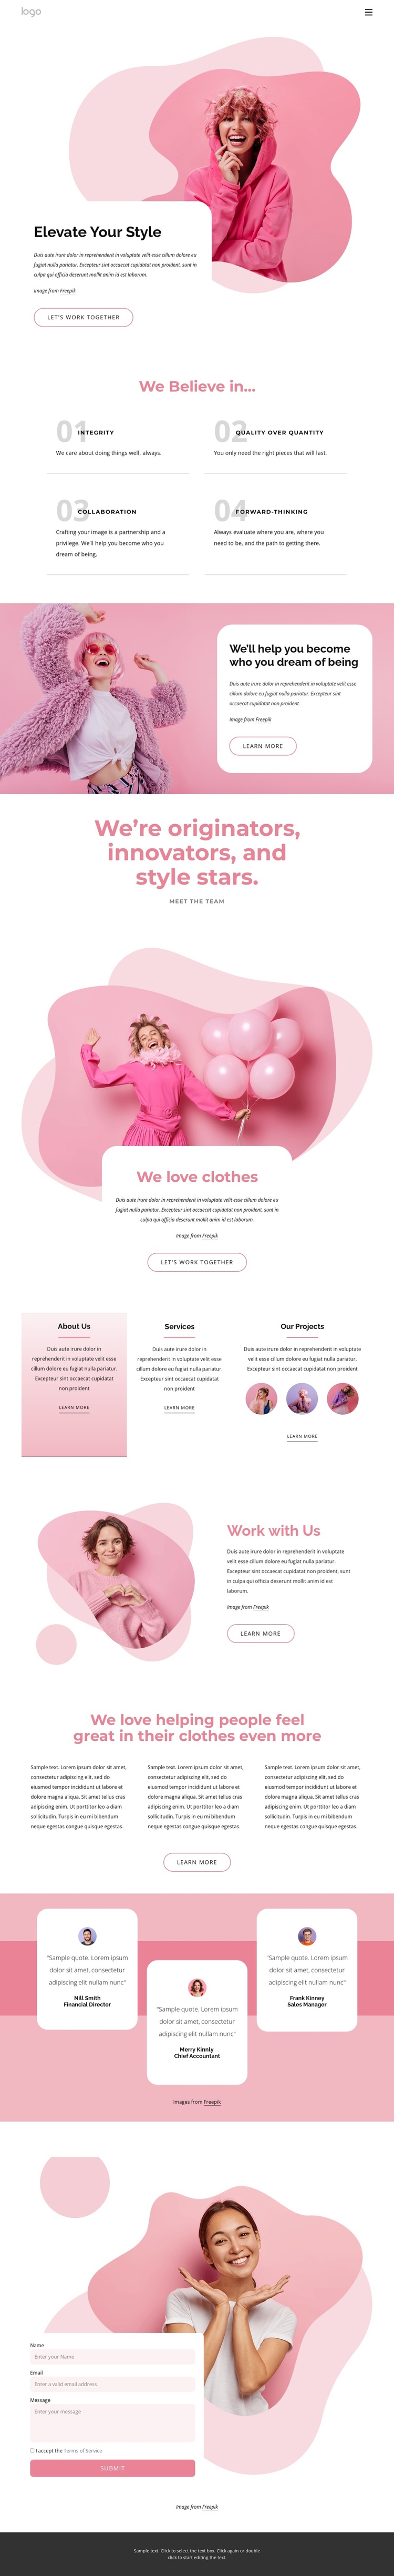 Elevate your style One Page Template